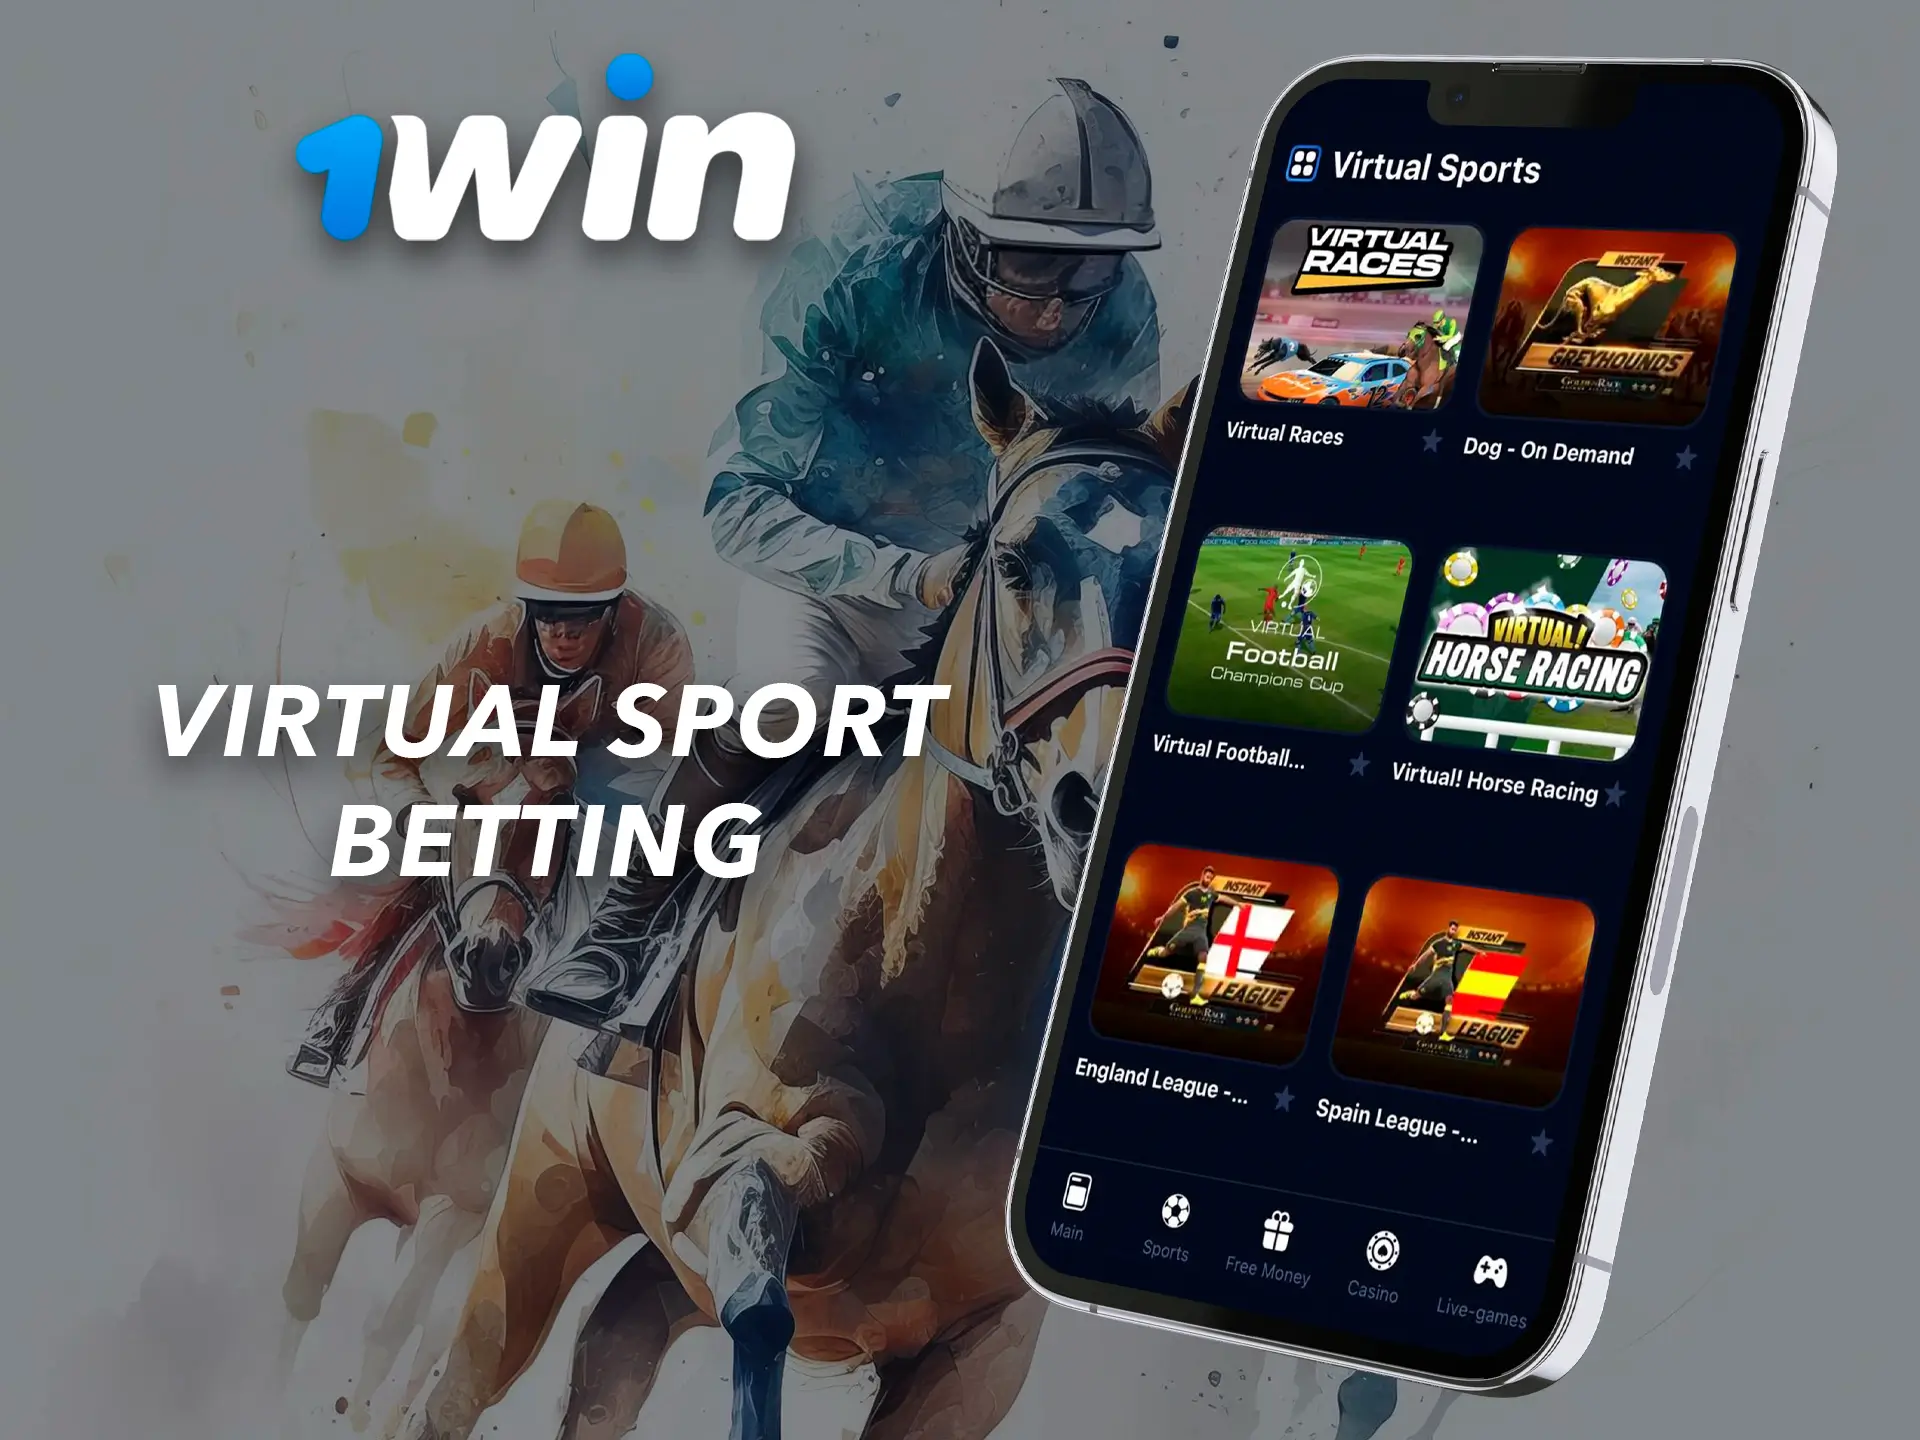 While waiting for your team's match to kick off, you can always bet on a virtual match at 1Win Casino.